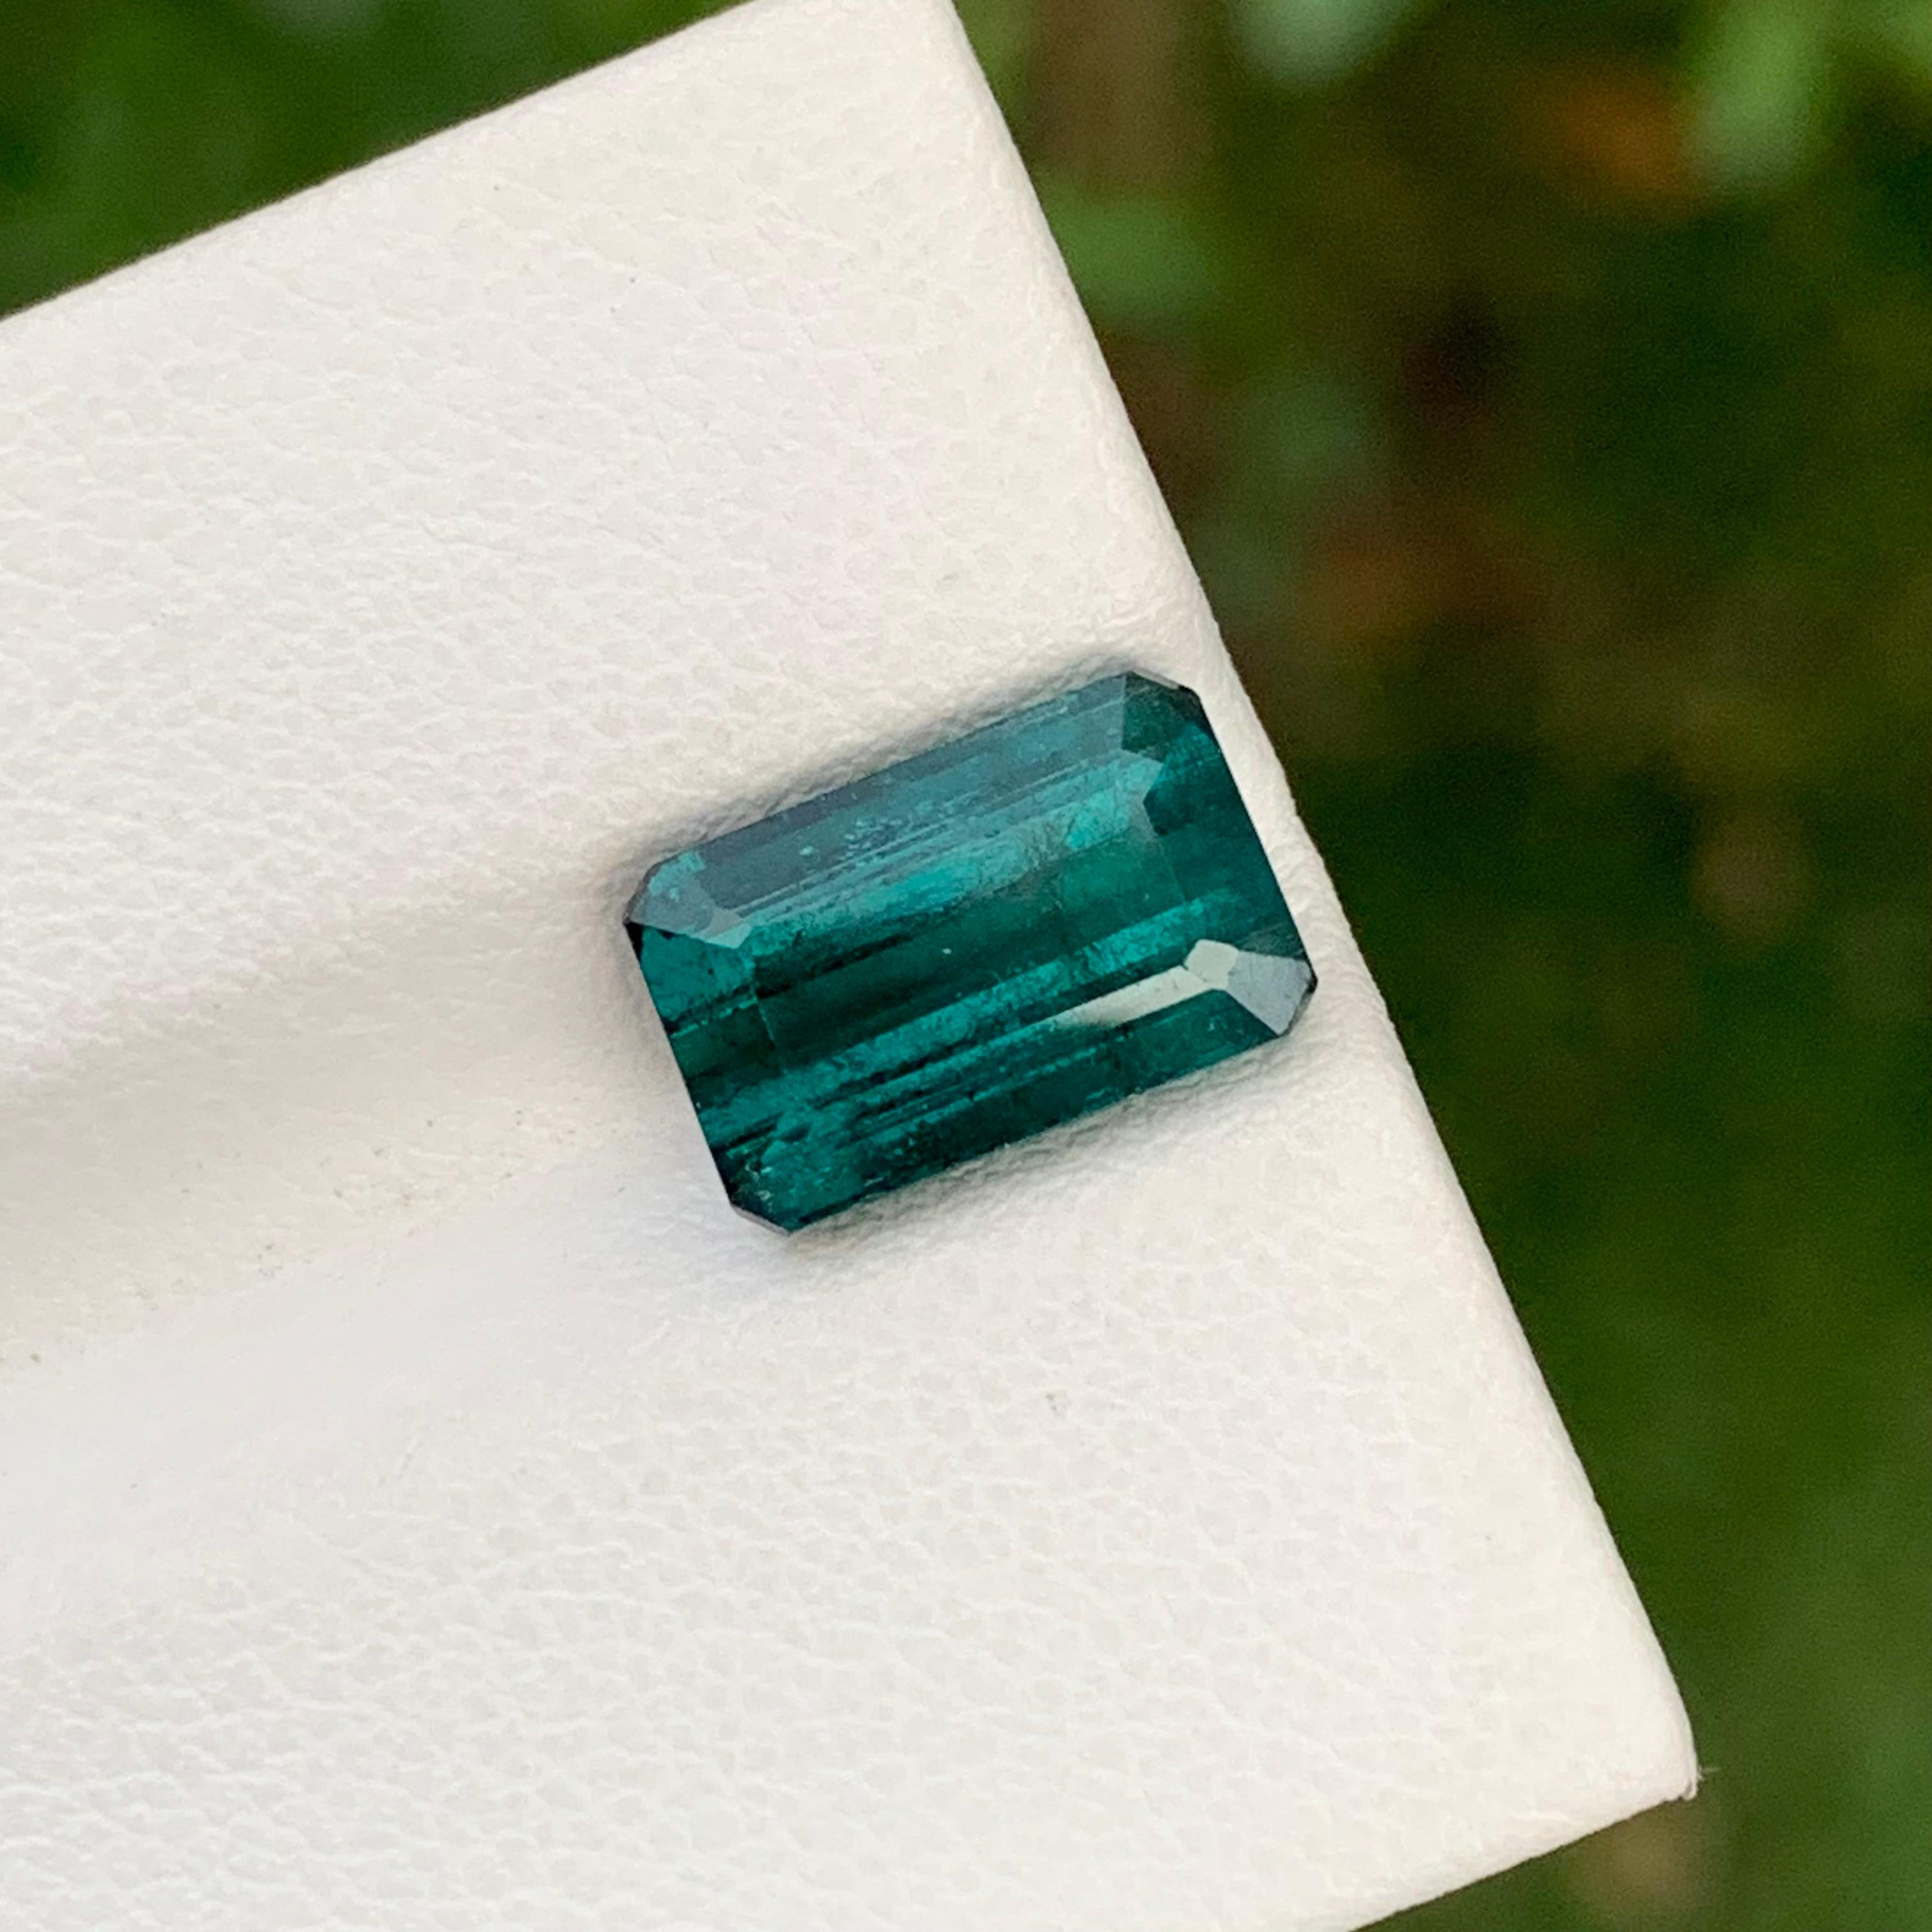 3.80 Carat Natural Loose Indicolite Tourmaline Included Gemstone From Earth Mine For Sale 3